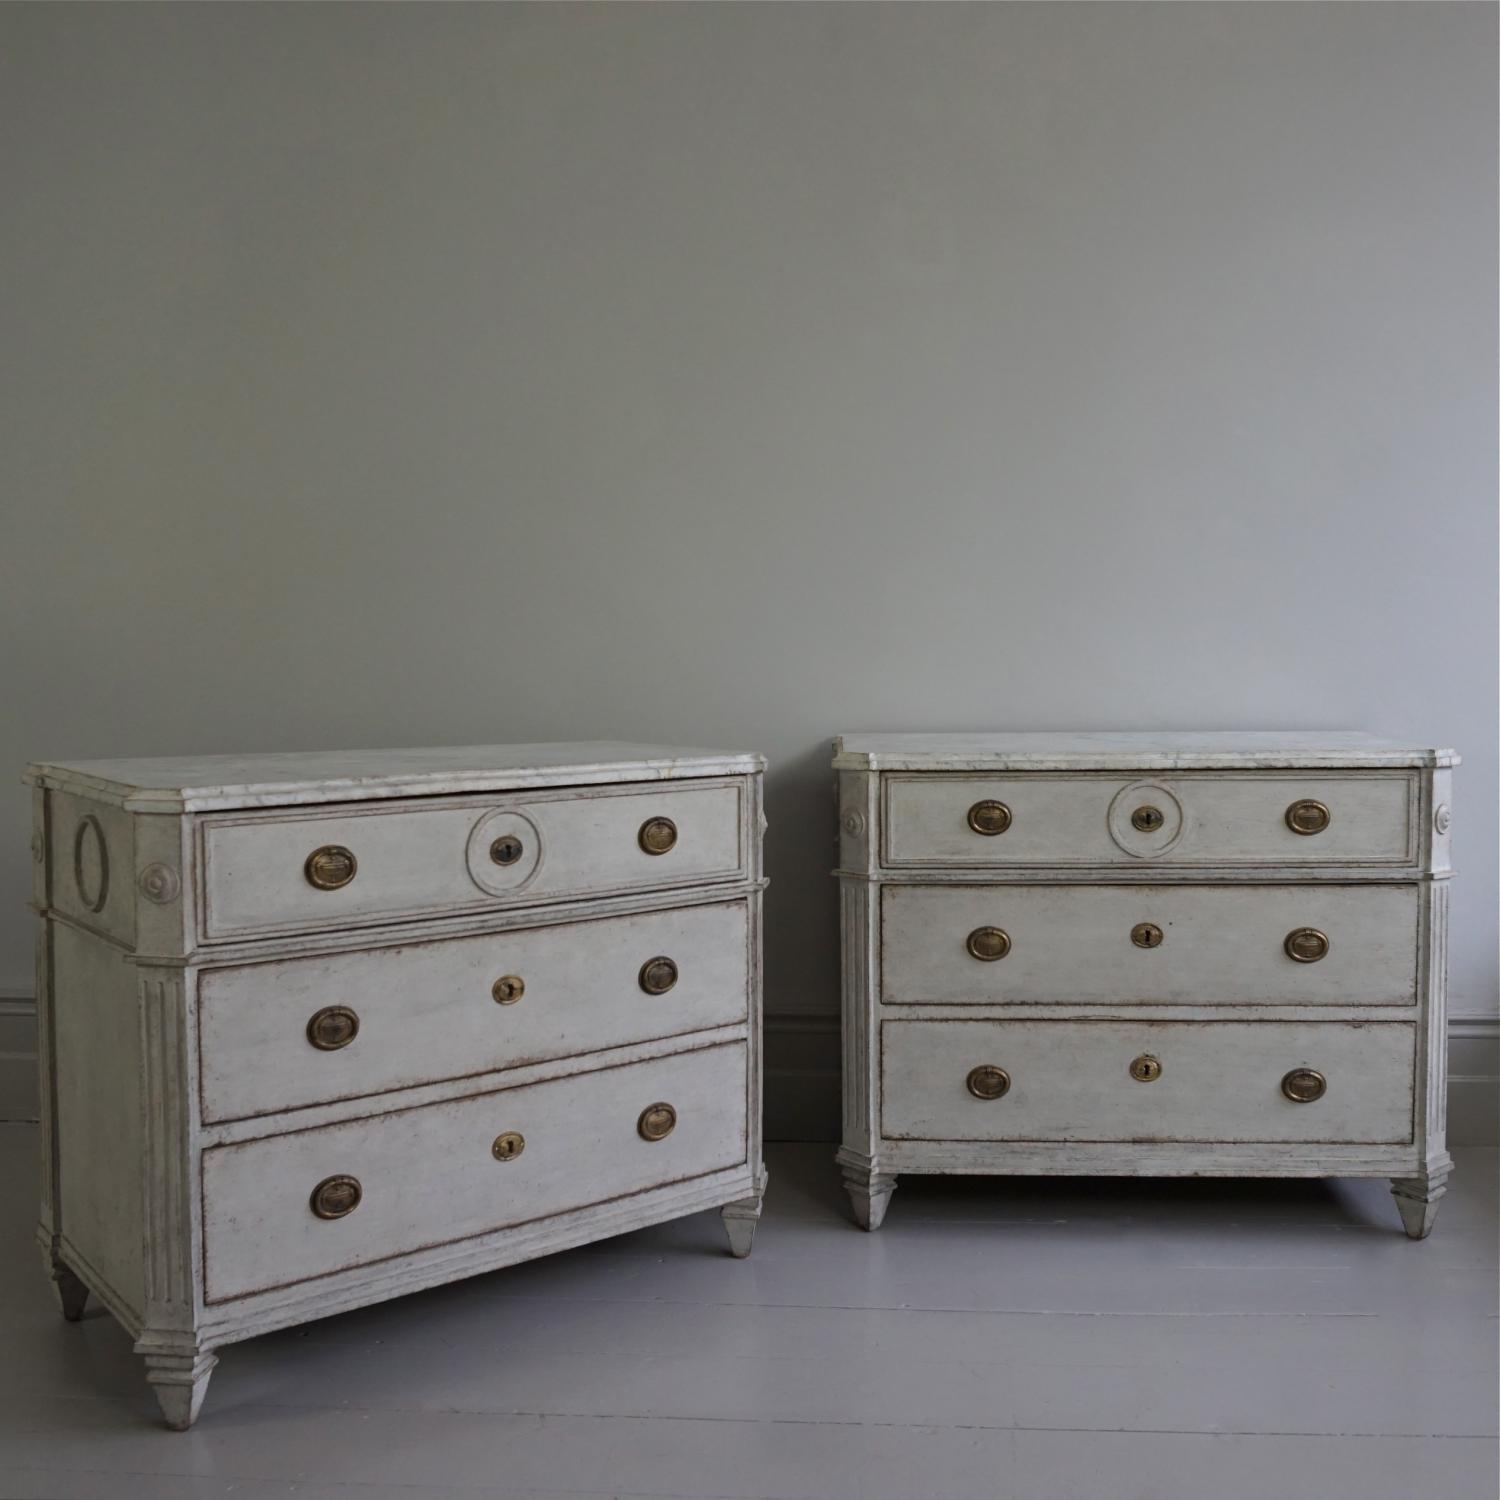 OUSTANDING PAIR OF SWEDISH GUSTAVIAN CHESTS